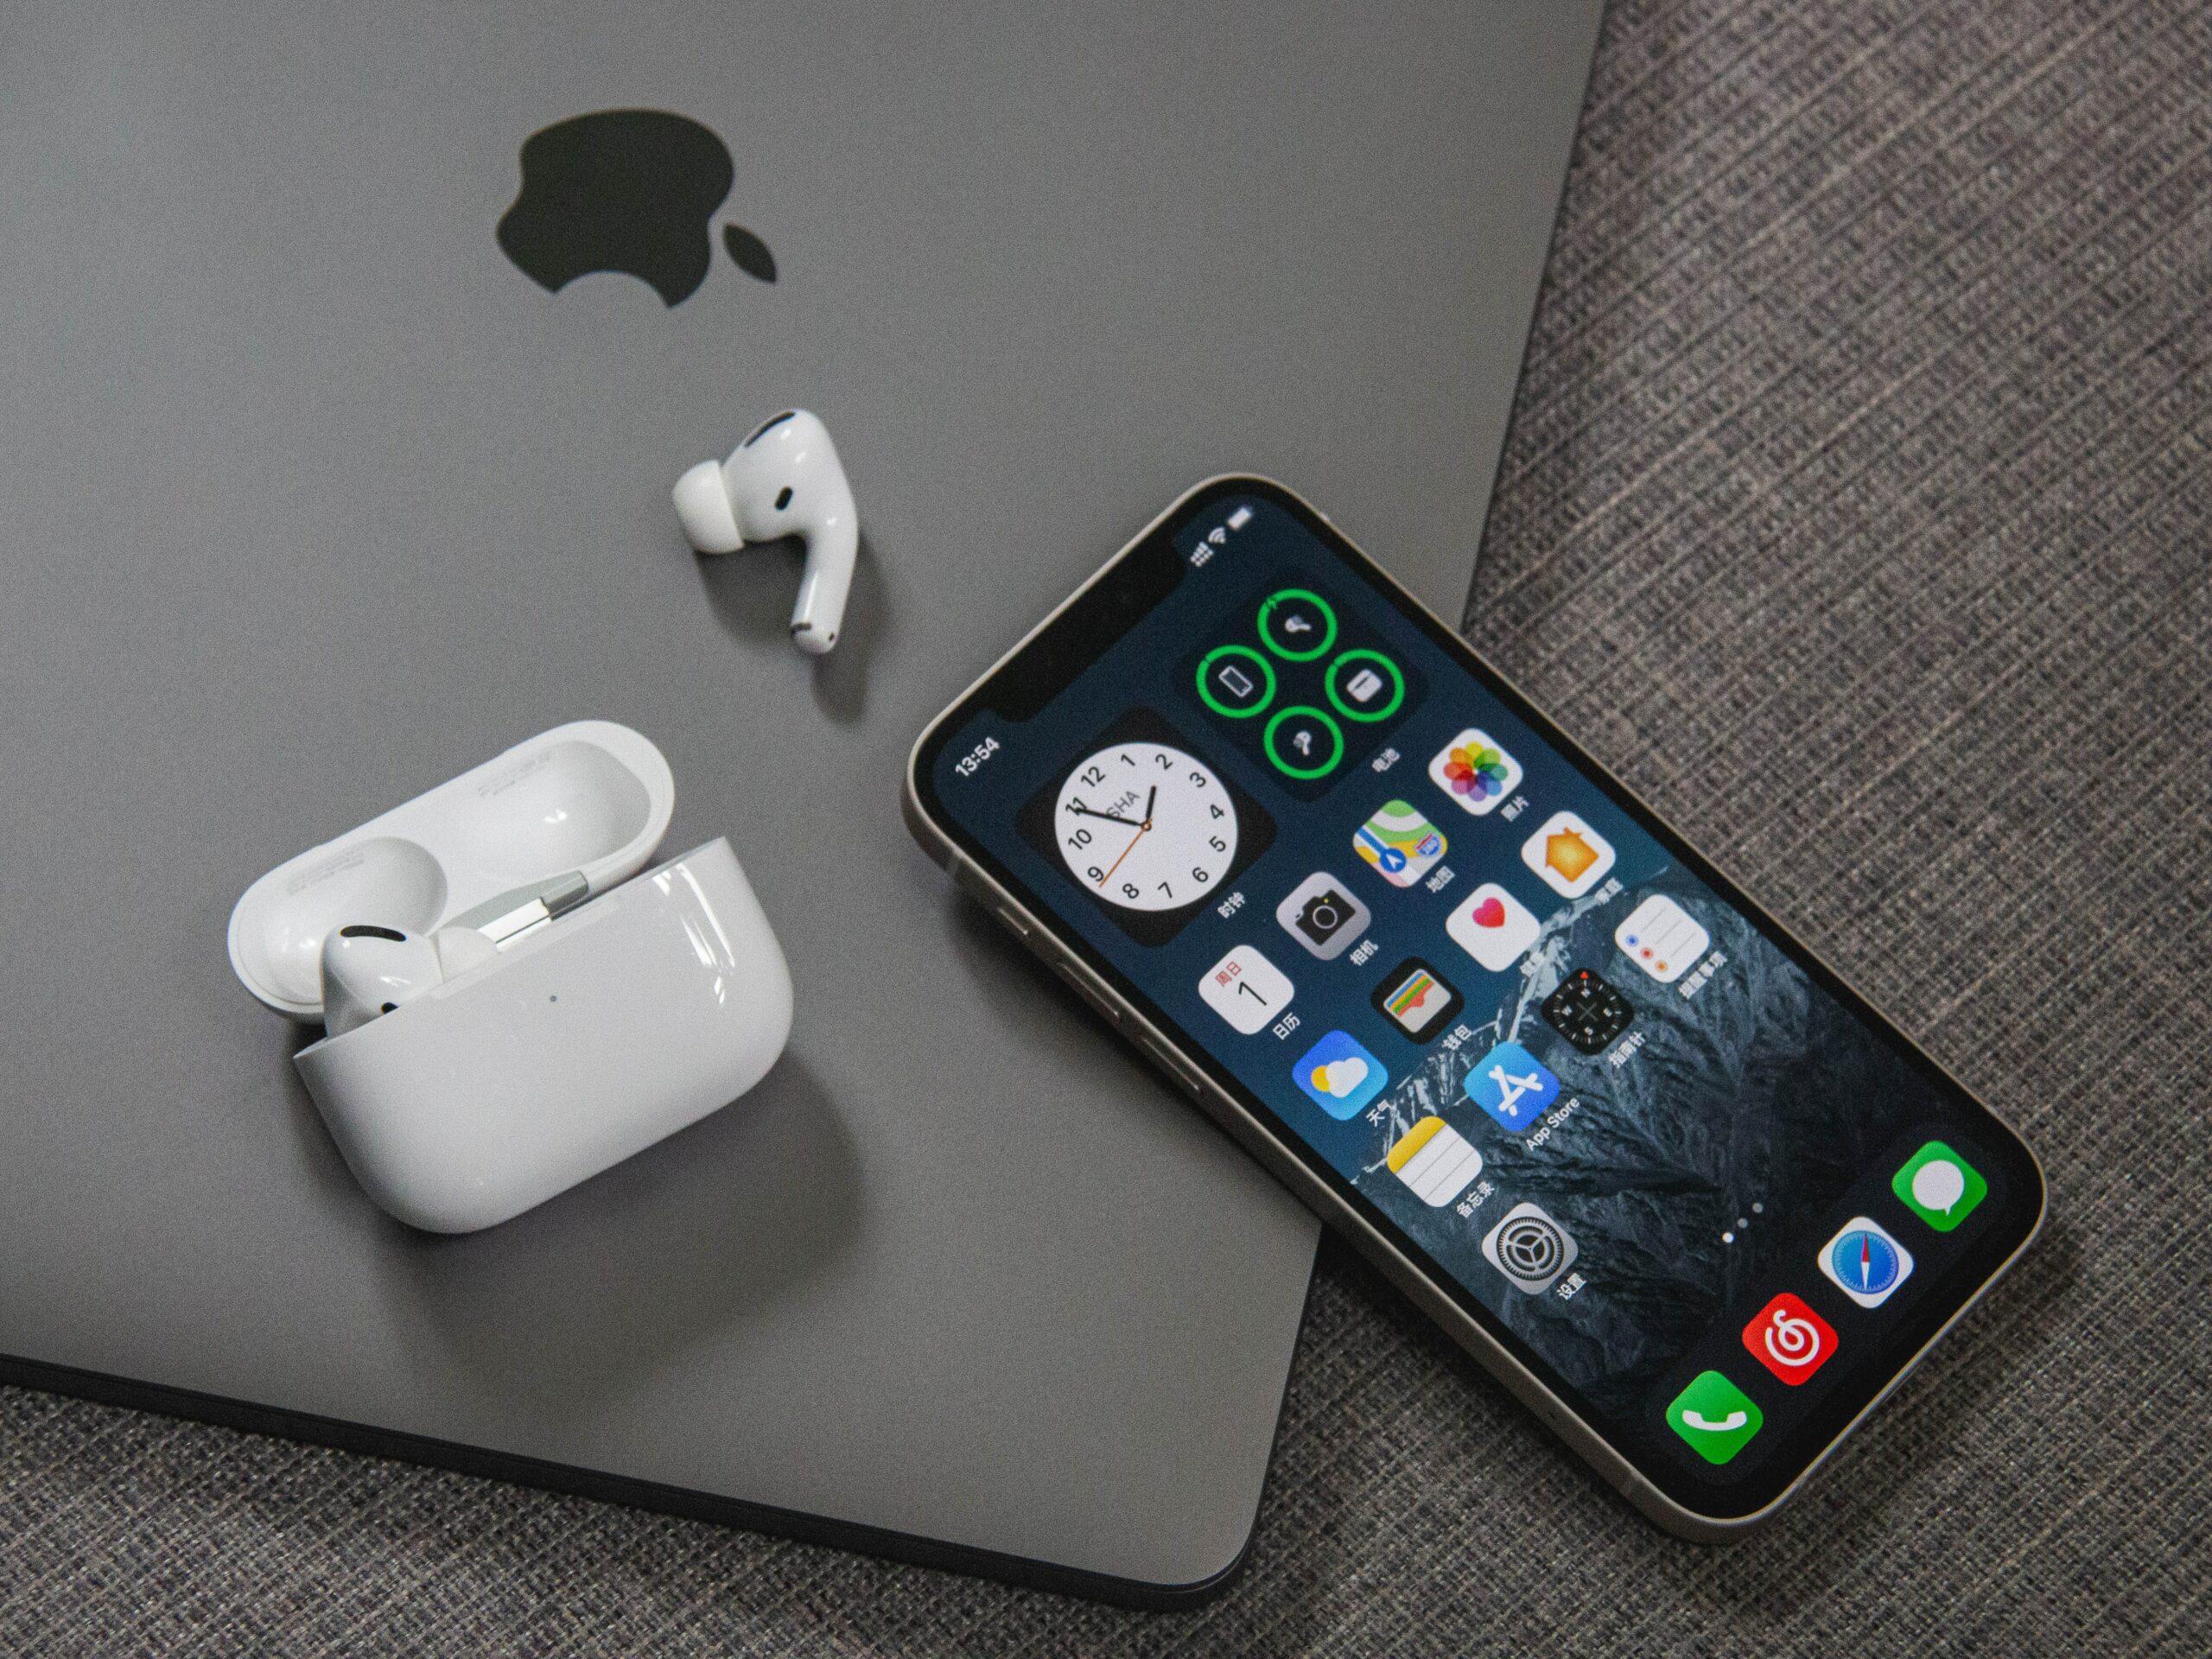 An Apple AirPods is sitting next to a laptop, demonstrating the setup of email on an Apple iPhone.